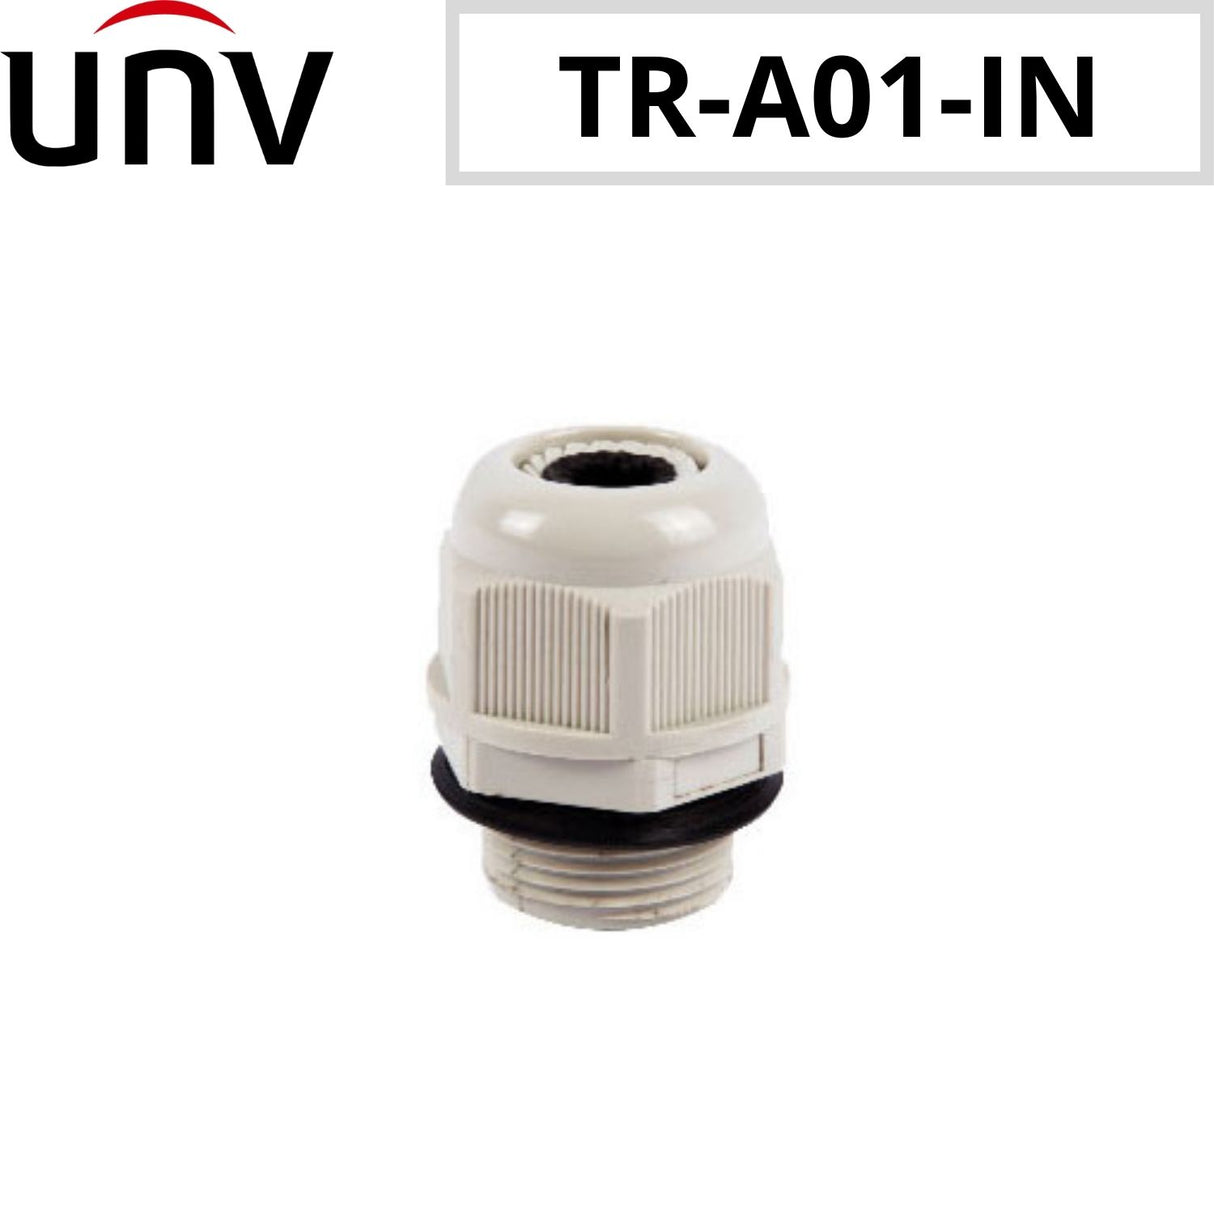 Uniview TR-A01-IN Plastic Waterproof Joint